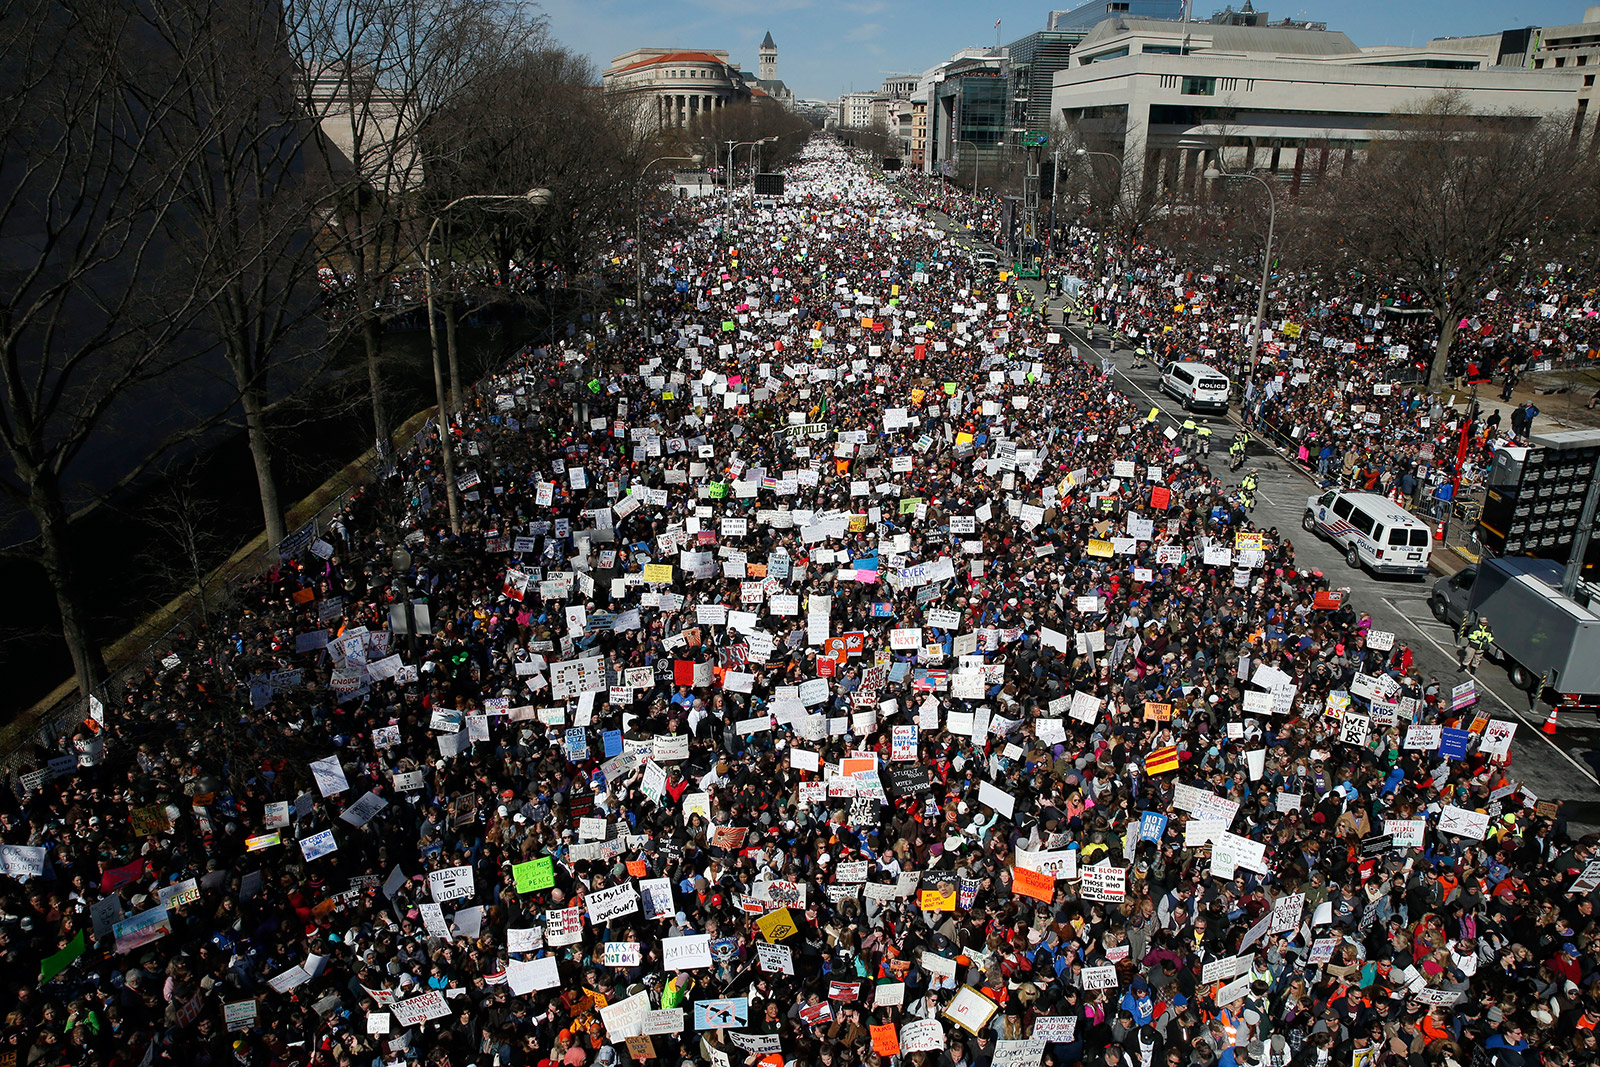 In pictures: The March for Our Lives protests